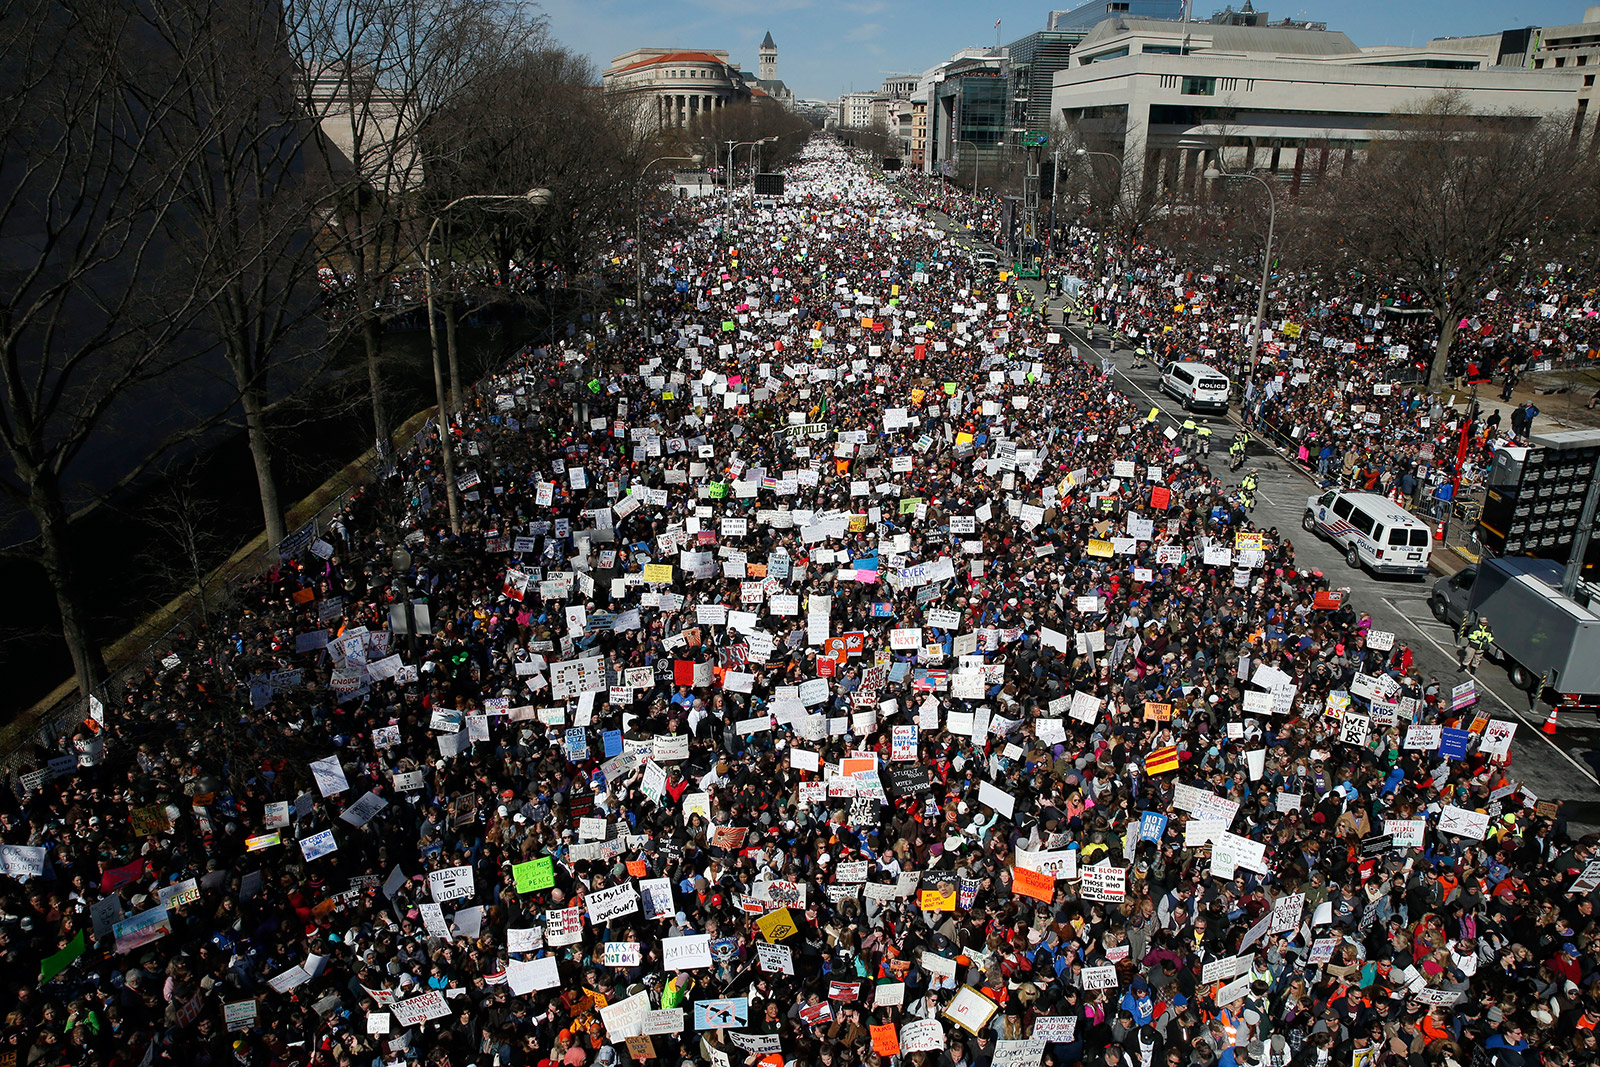 In pictures: The March for Our Lives protests